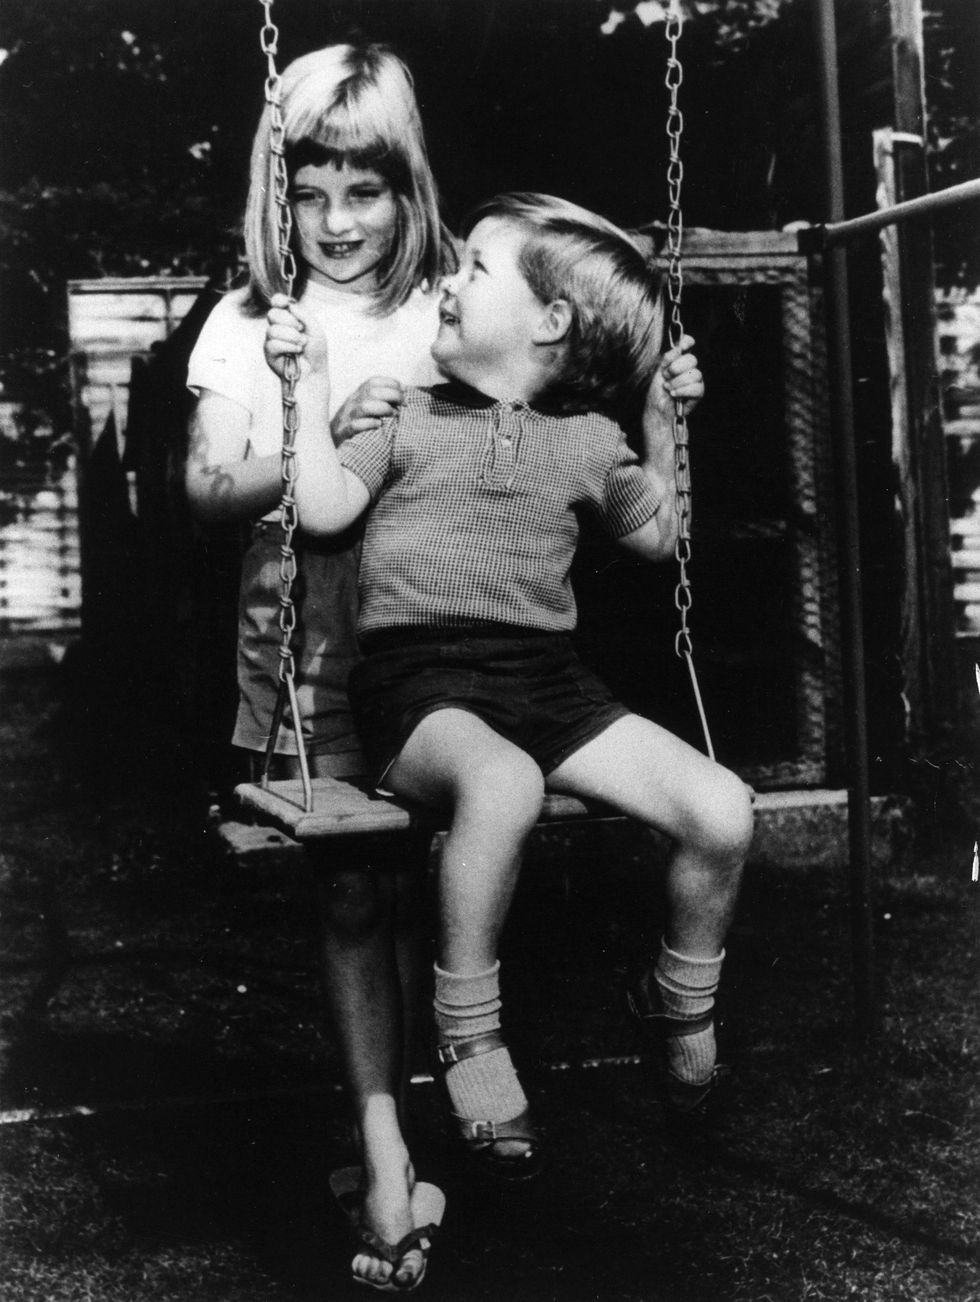 Swing, Photograph, Black, People, Black-and-white, Child, Snapshot, Standing, Monochrome, Public space, 